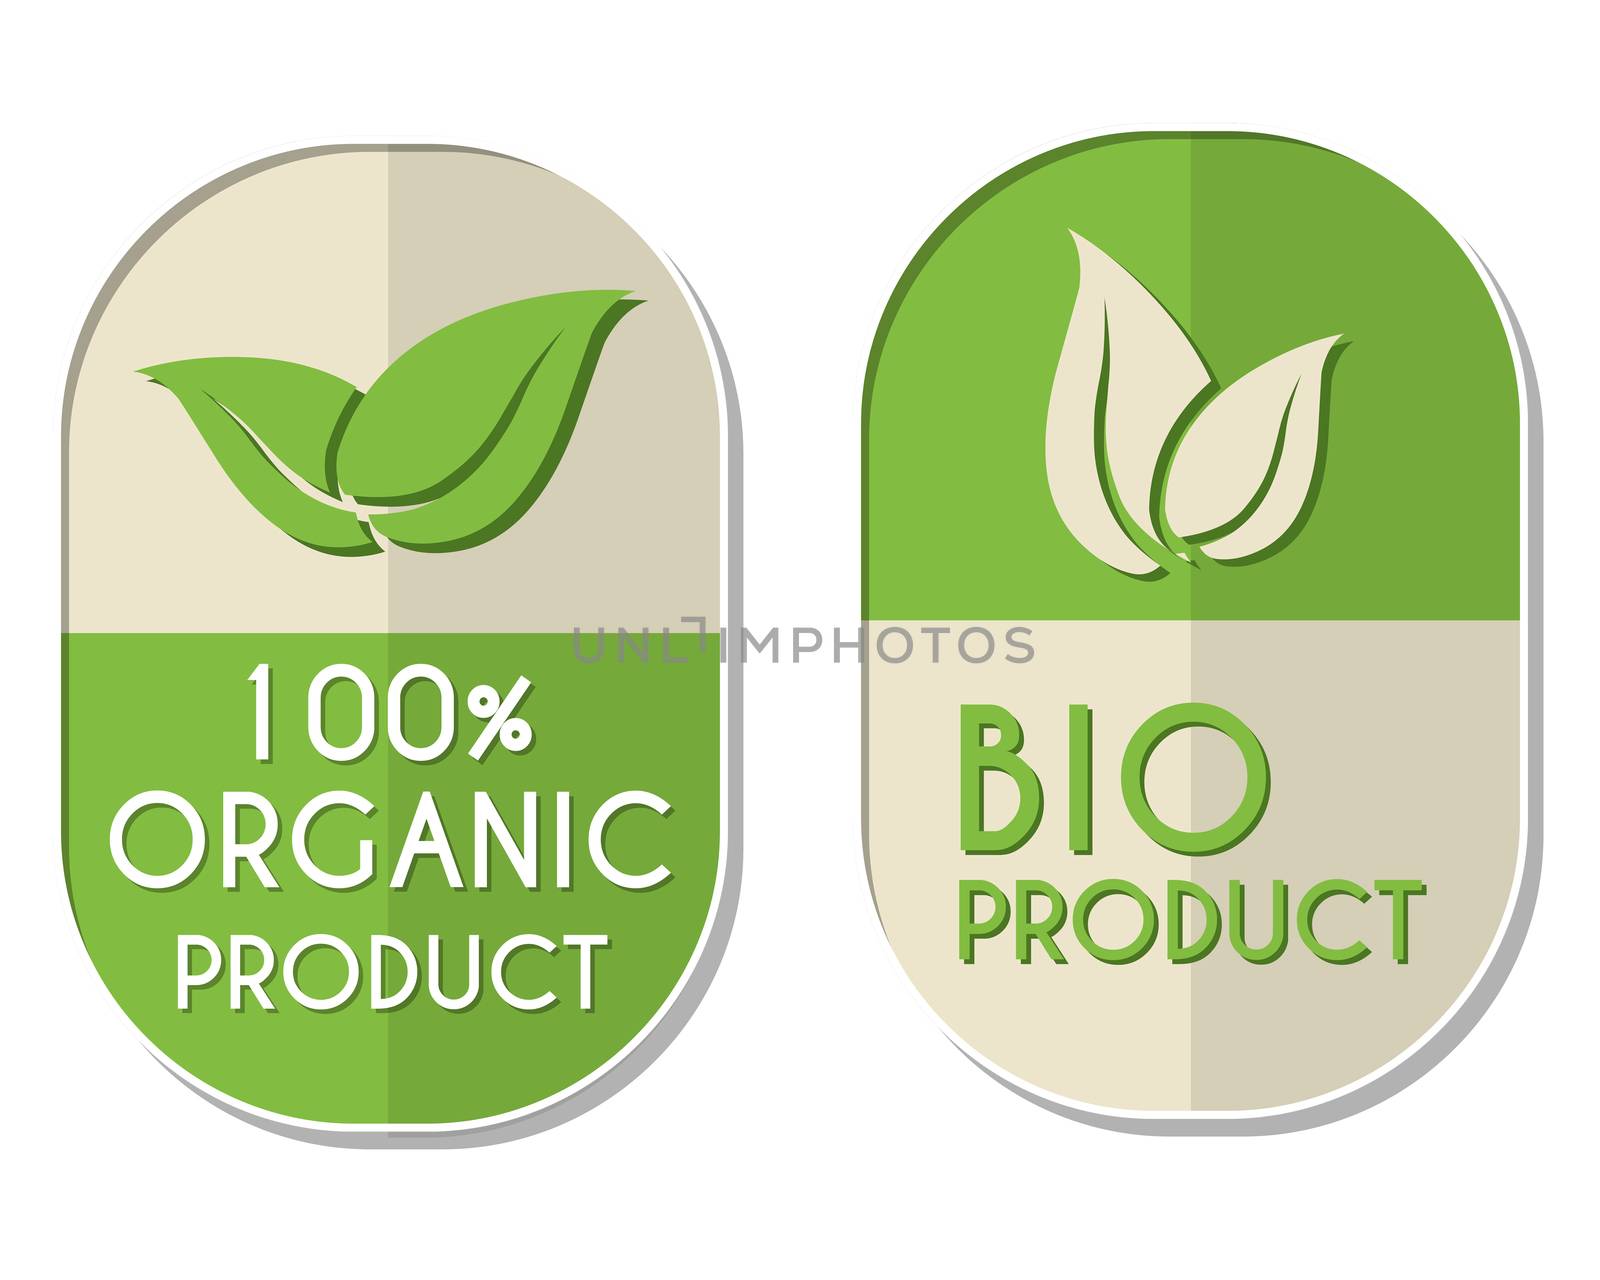 100 percent organic and bio product with leaf sign, two elliptic by marinini